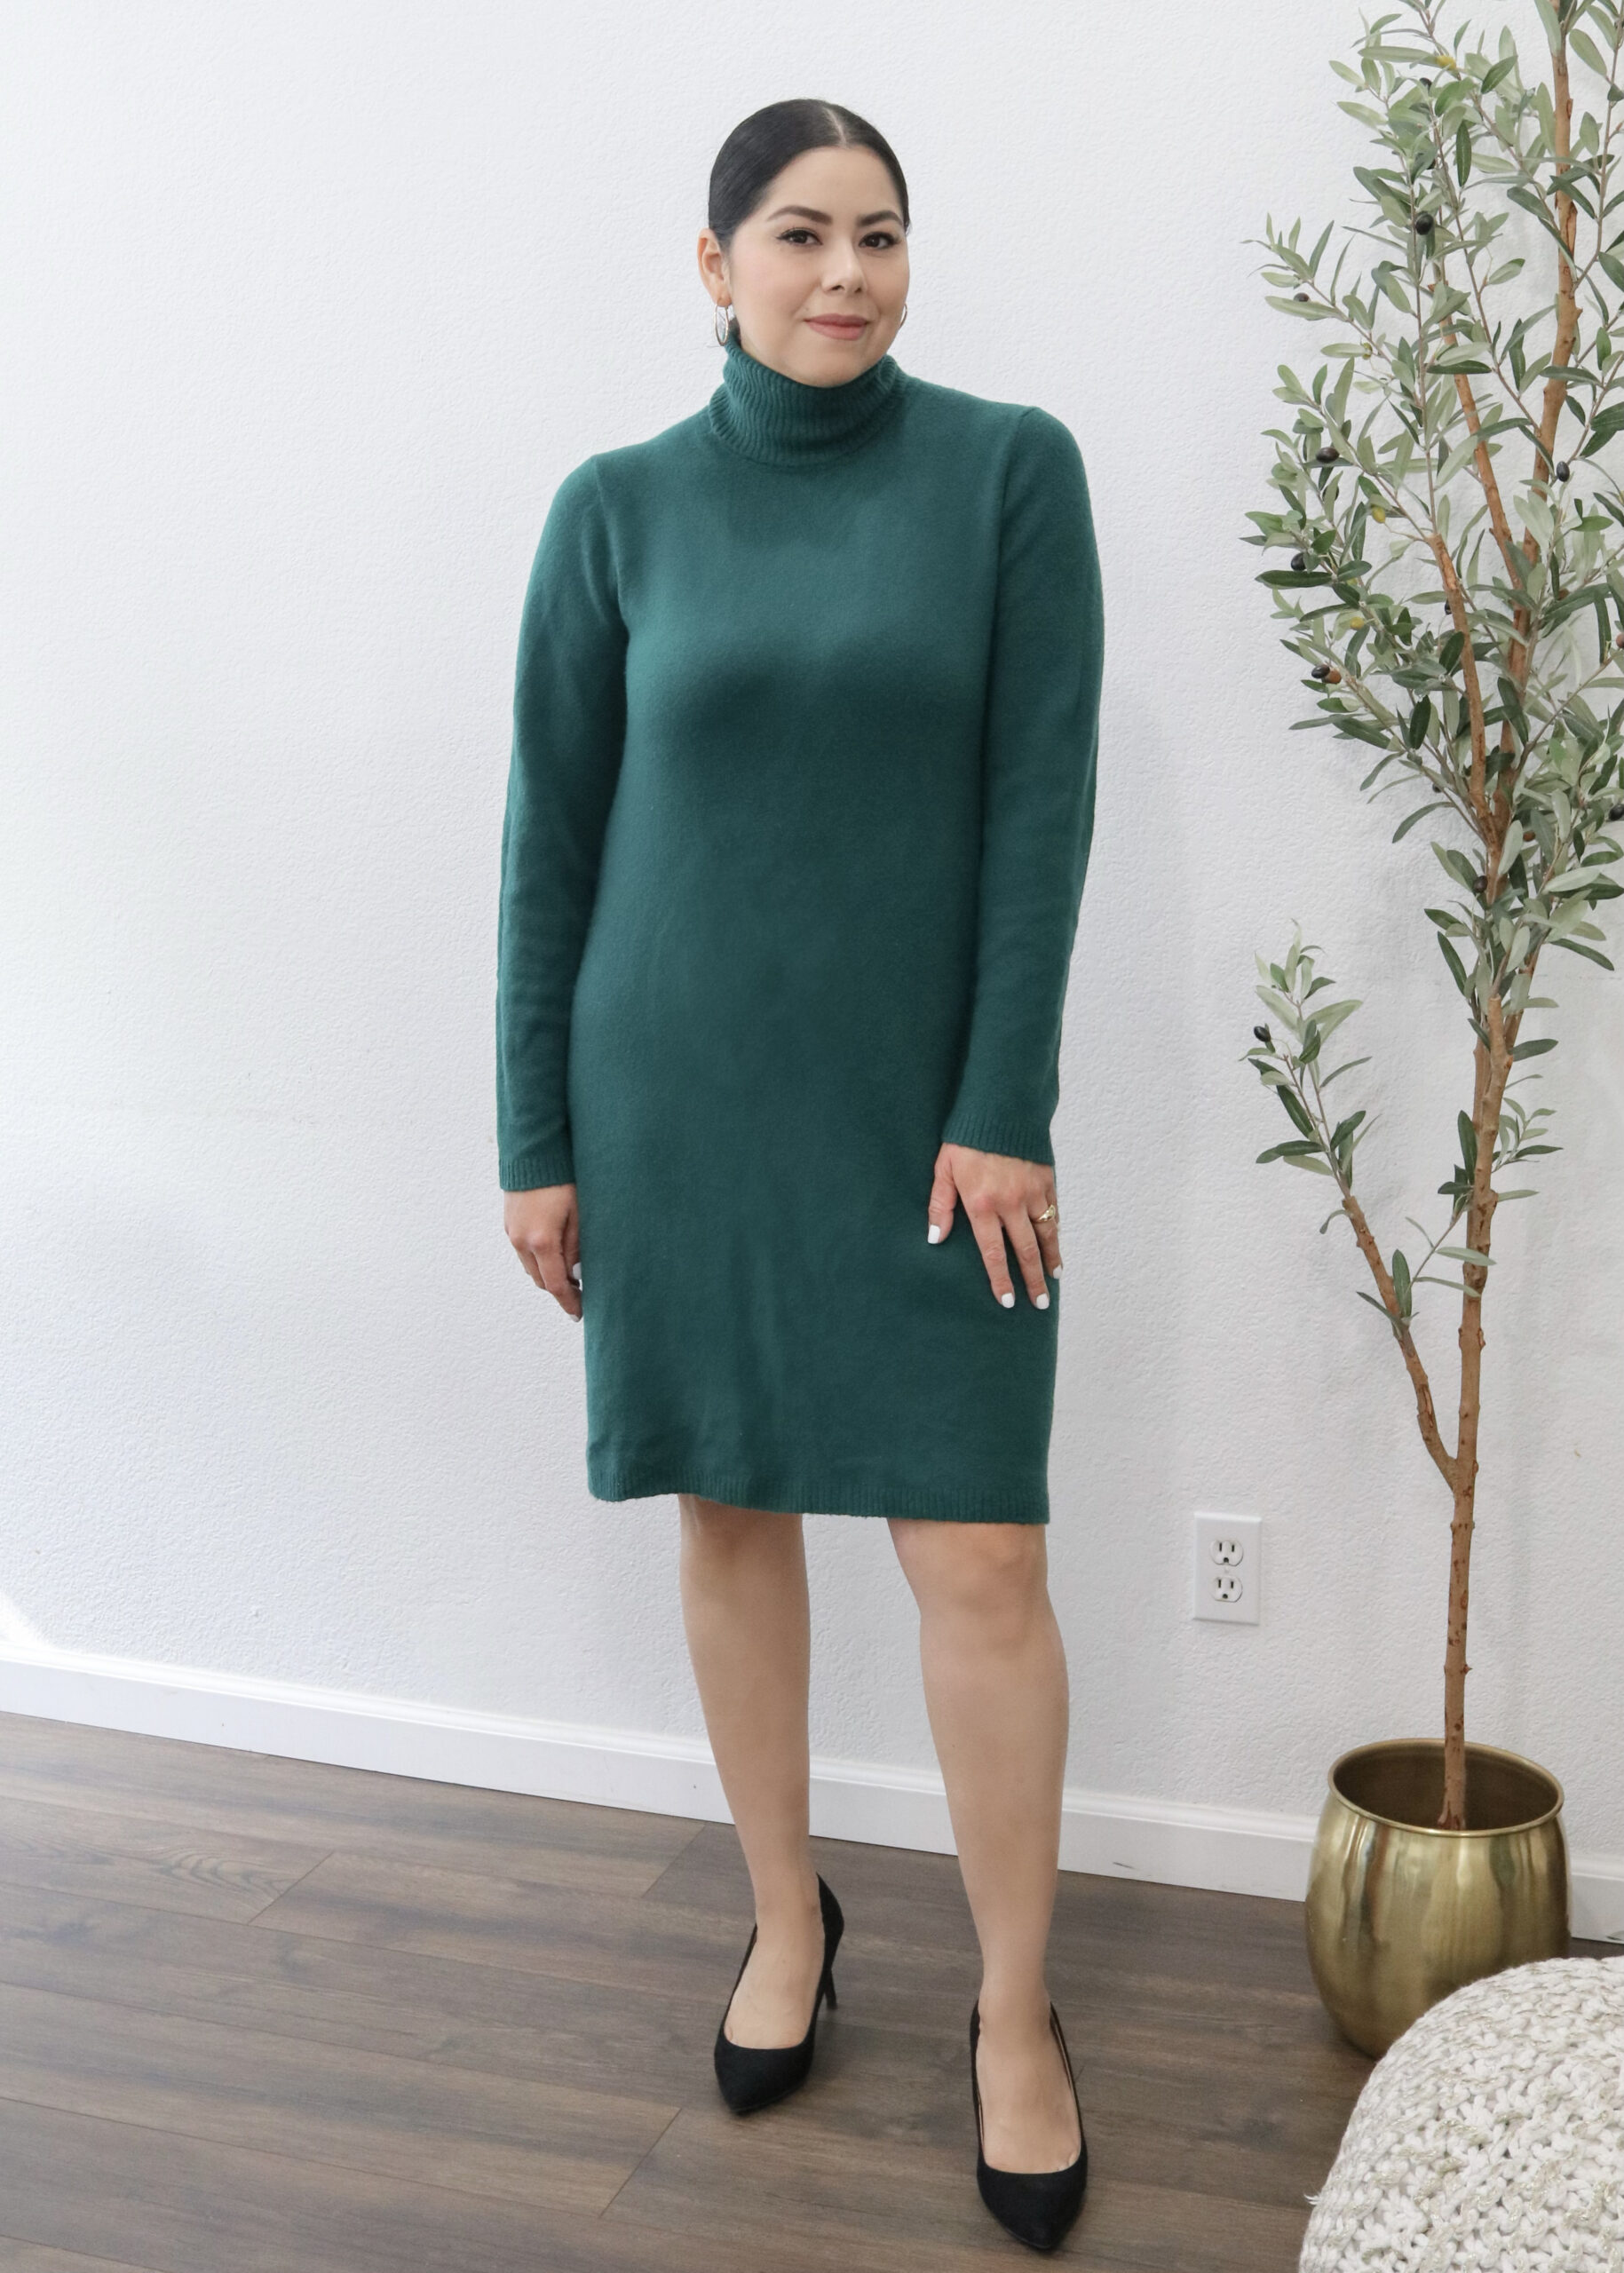 staying warm in winter, winter workwear, how to style a turtleneck dress